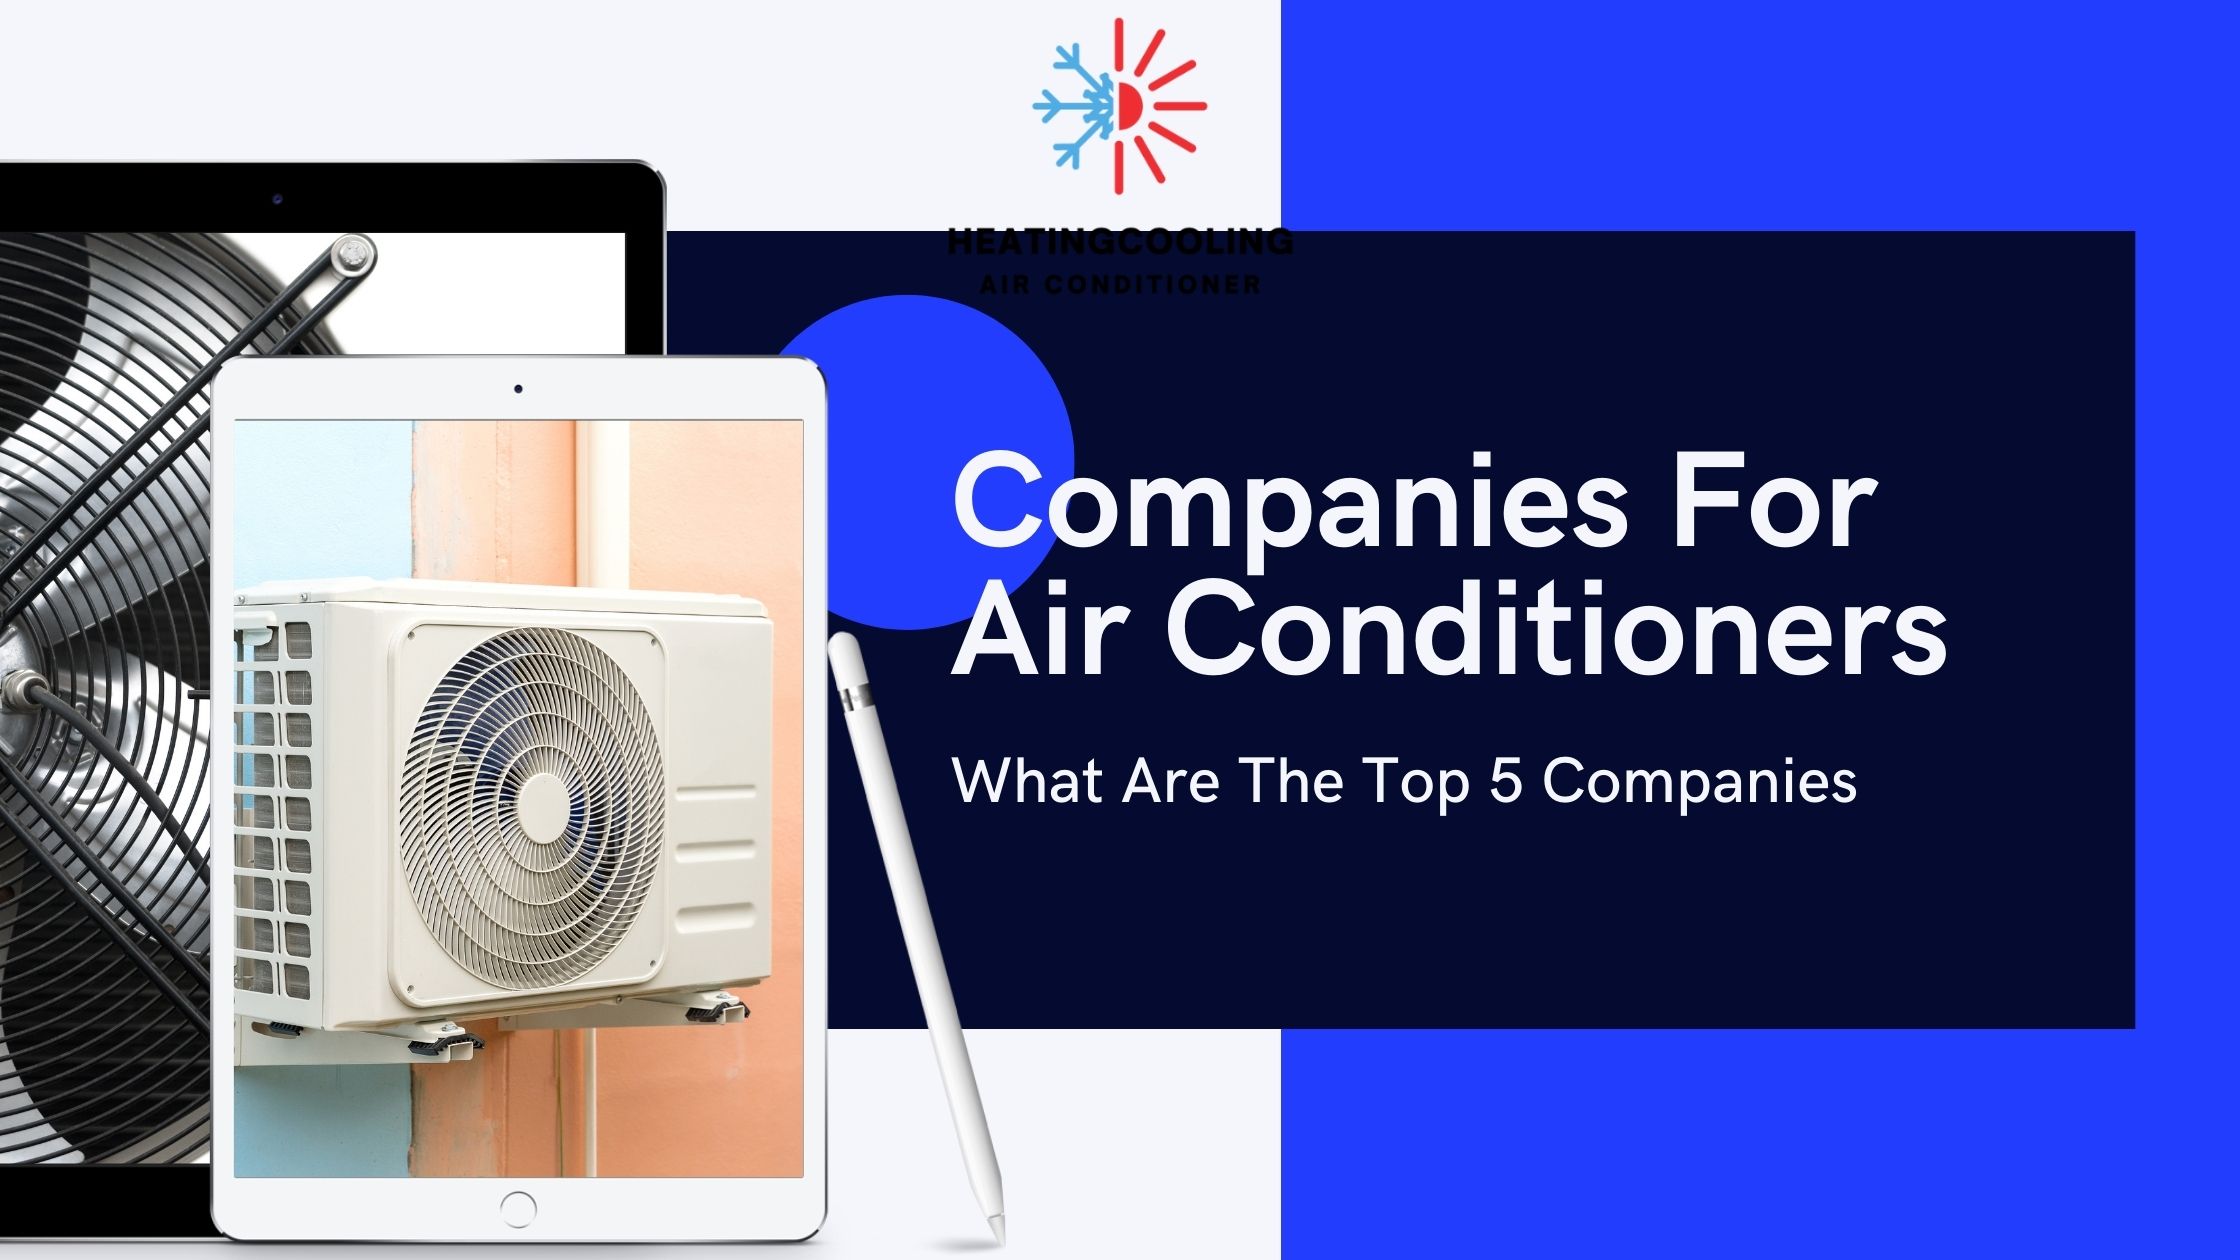 What Are The Top 5 Companies For Ac?